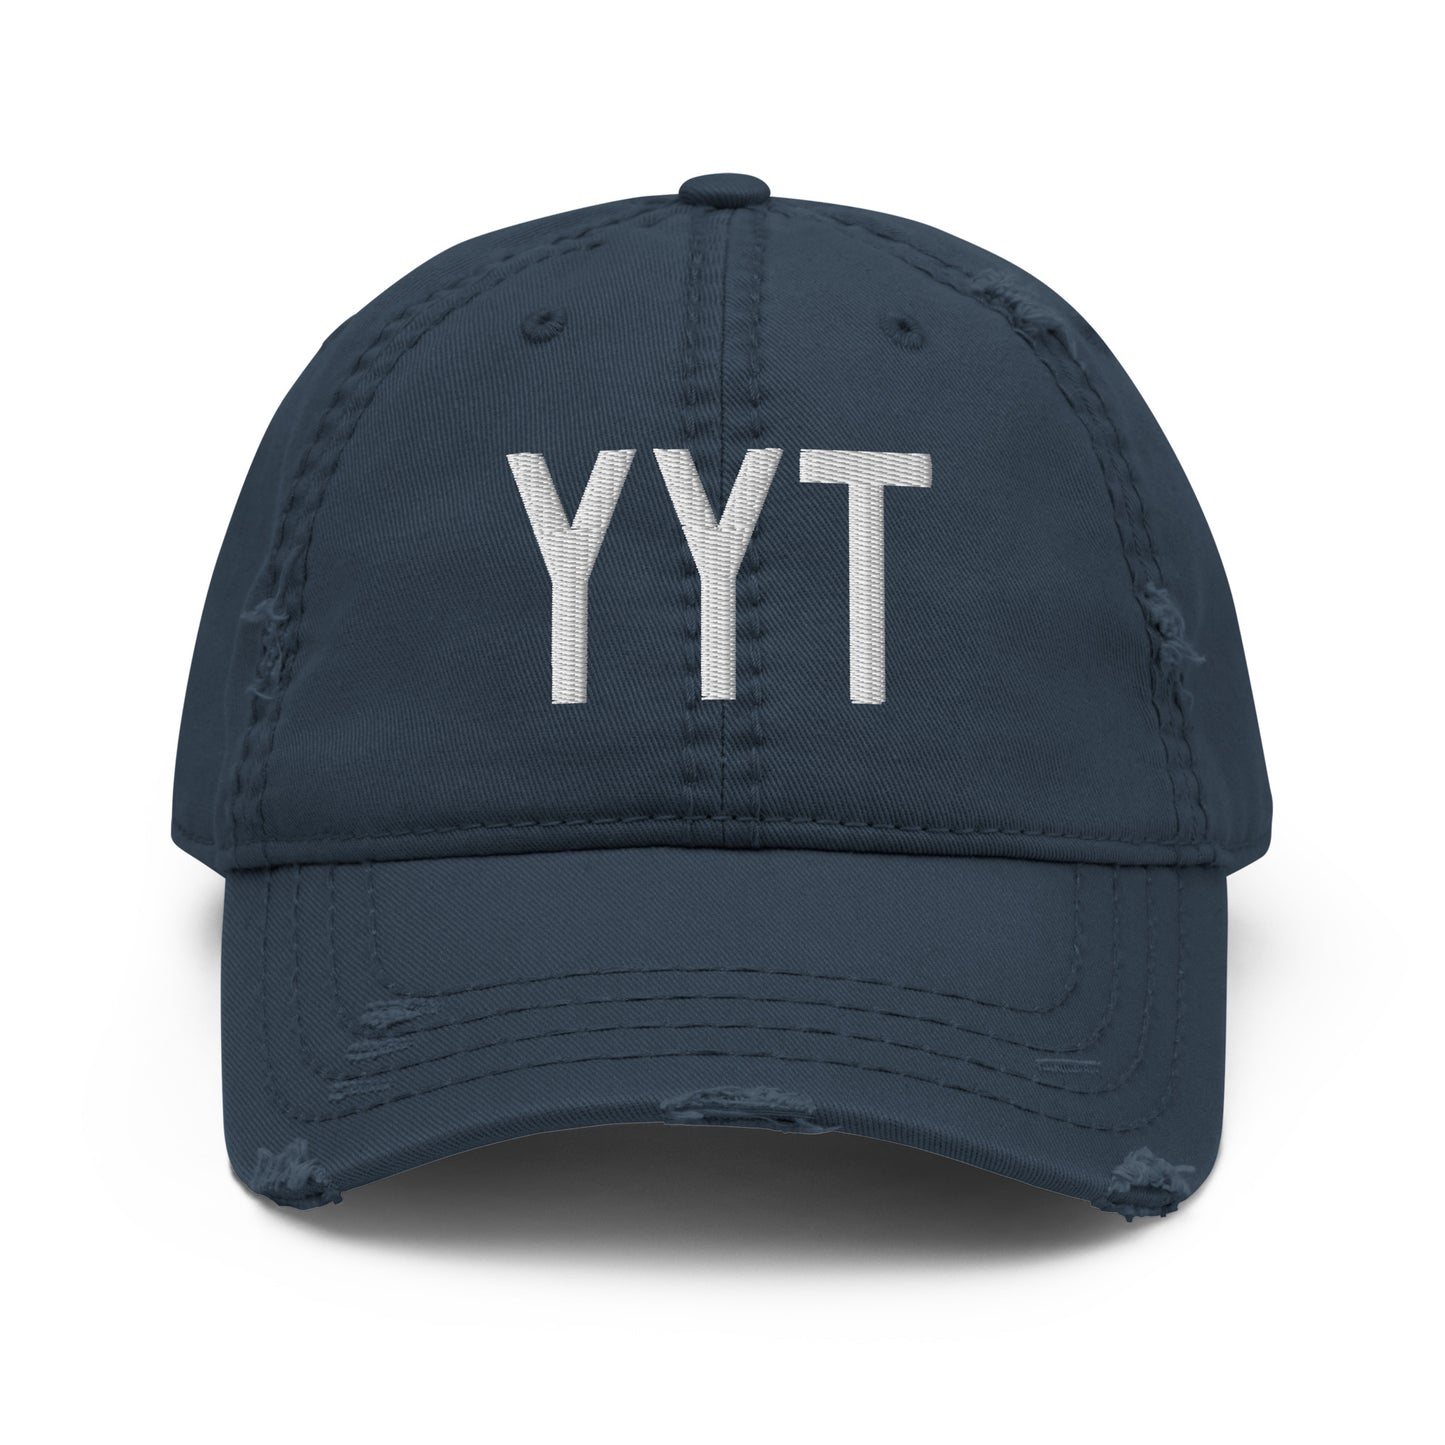 Airport Code Distressed Hat - White • YYT St. John's • YHM Designs - Image 13